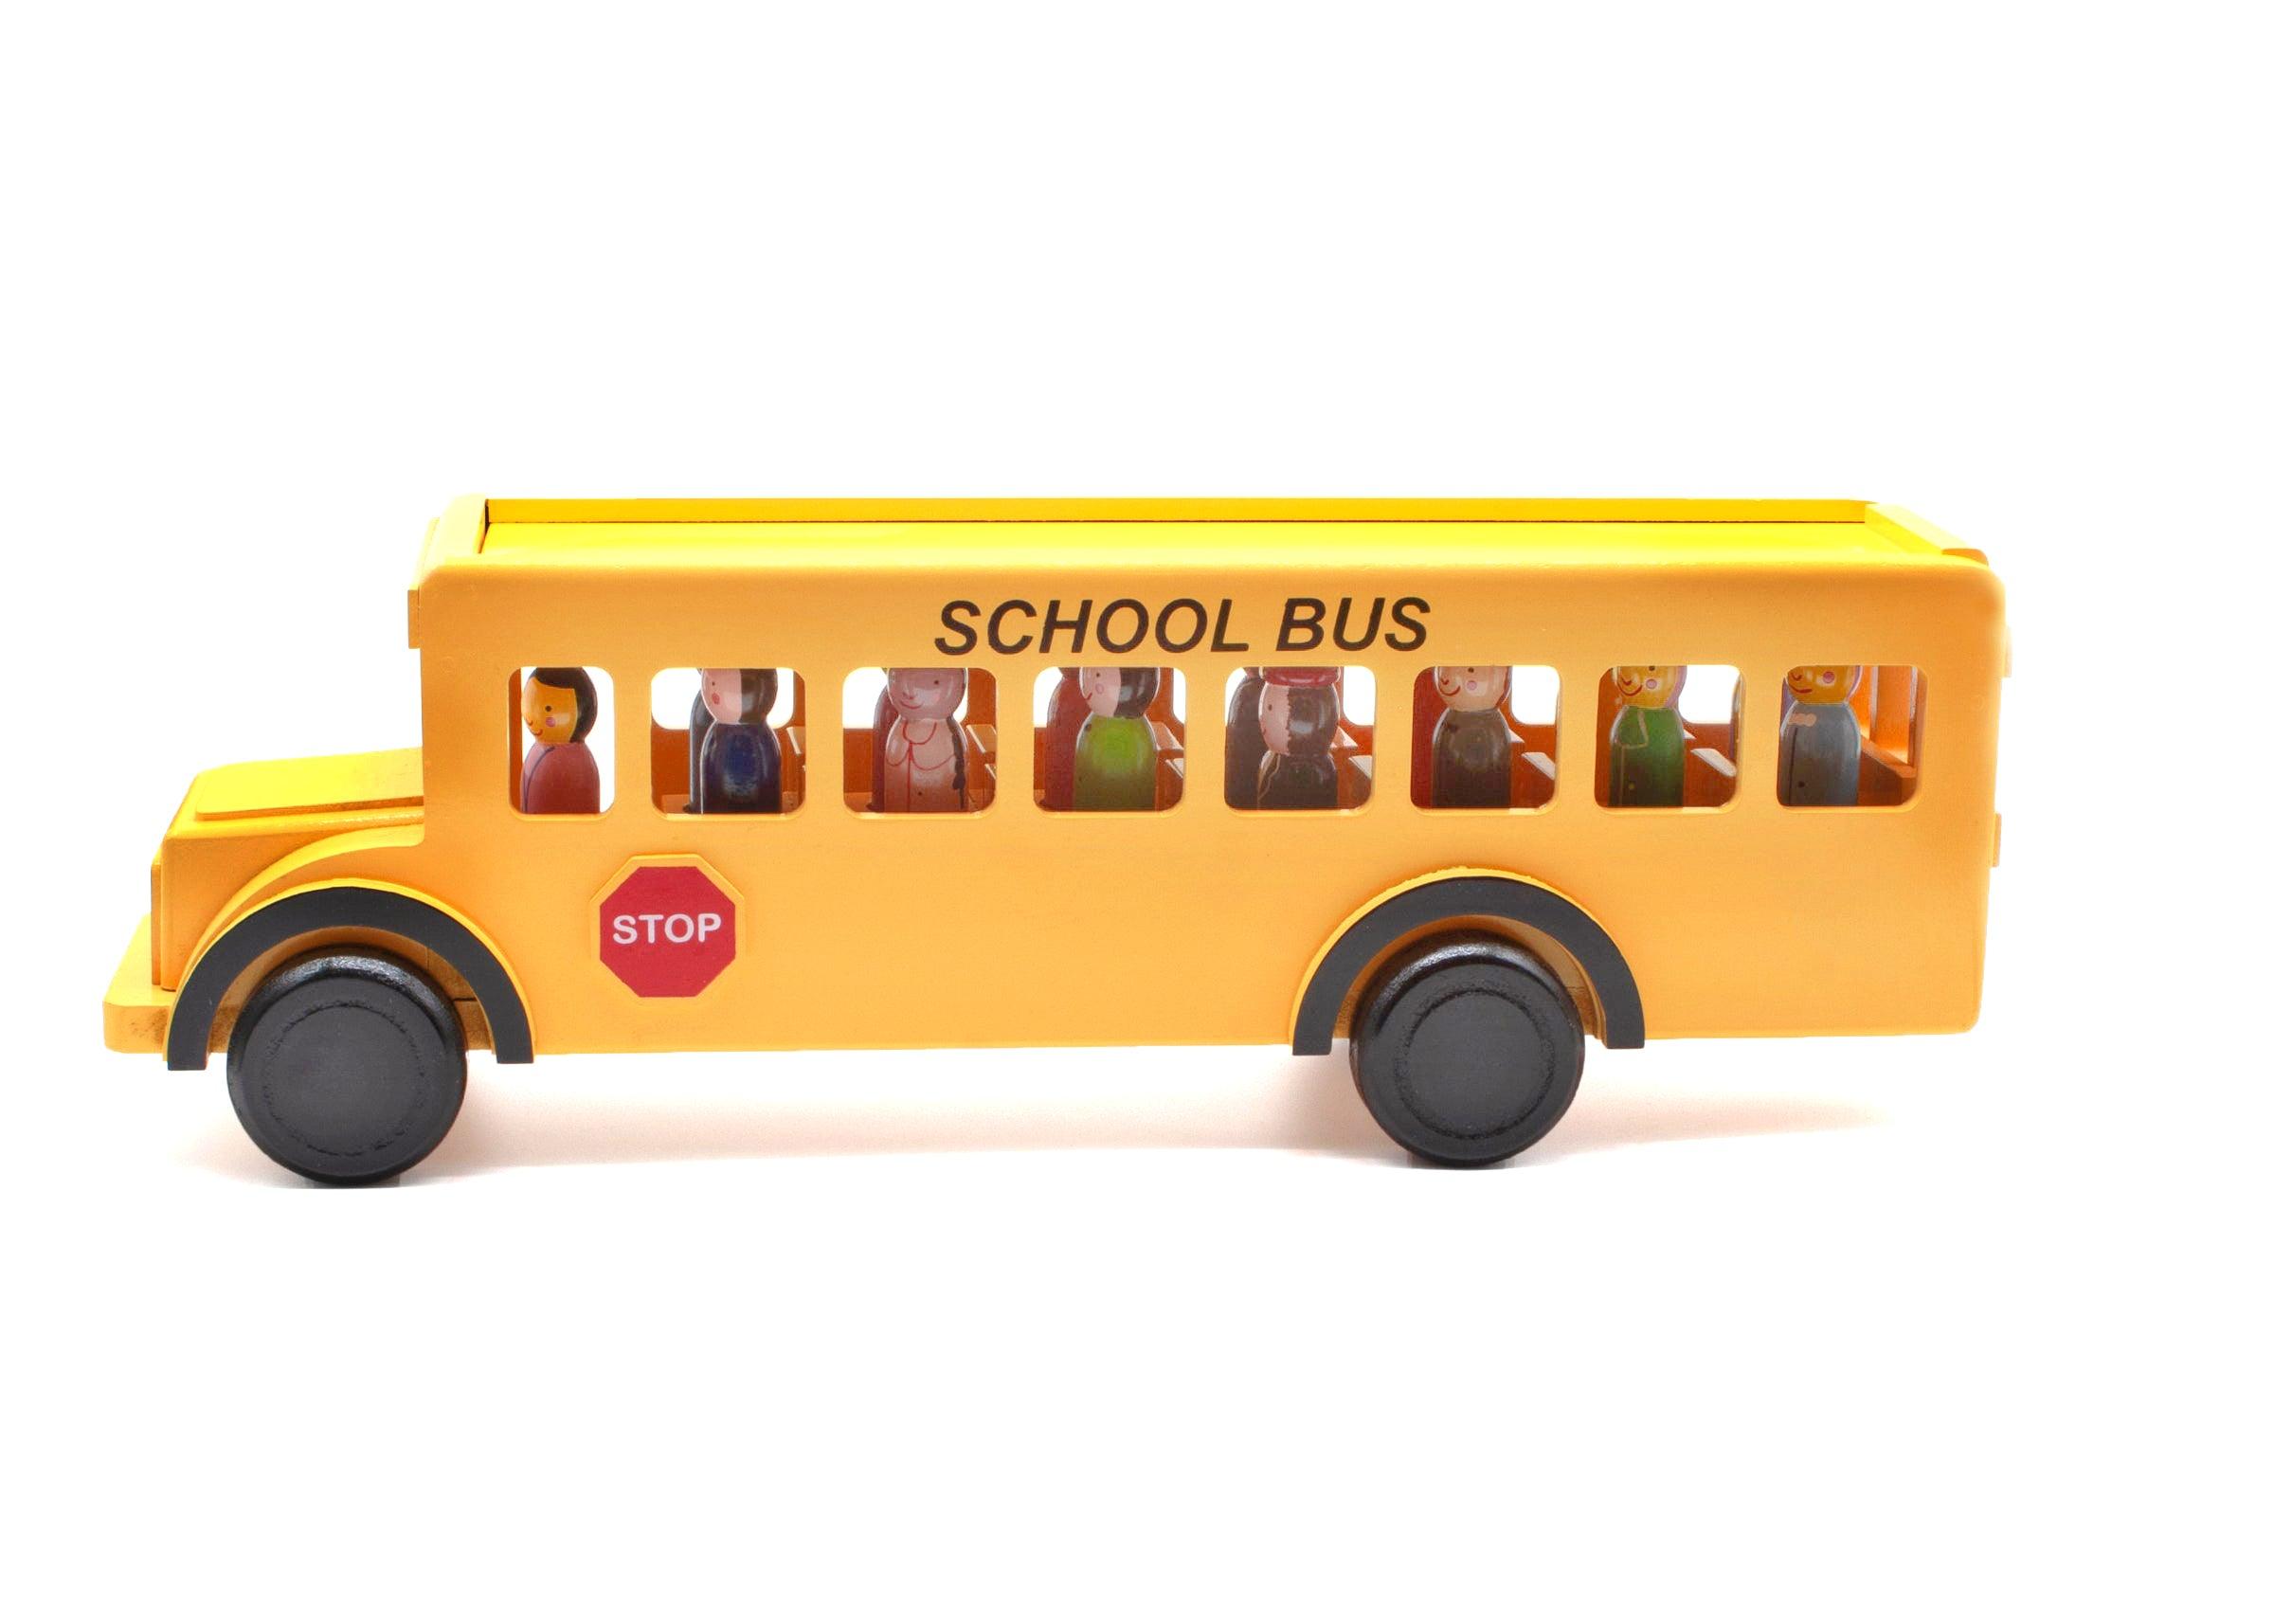 Large Wooden School Bus with Children - Why and Whale